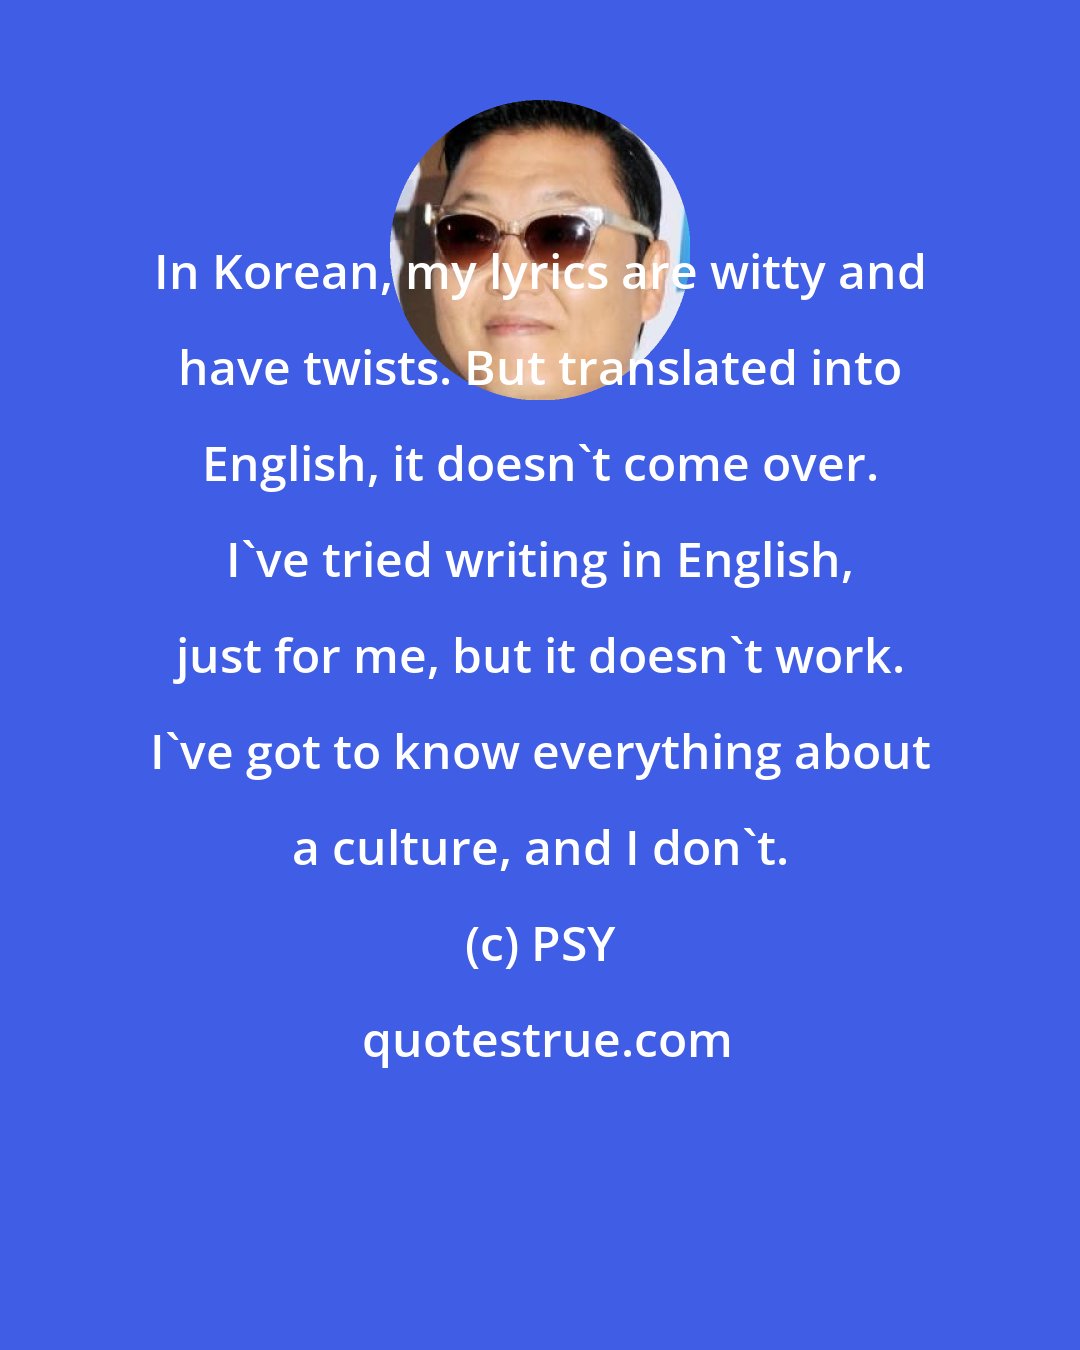 PSY: In Korean, my lyrics are witty and have twists. But translated into English, it doesn't come over. I've tried writing in English, just for me, but it doesn't work. I've got to know everything about a culture, and I don't.